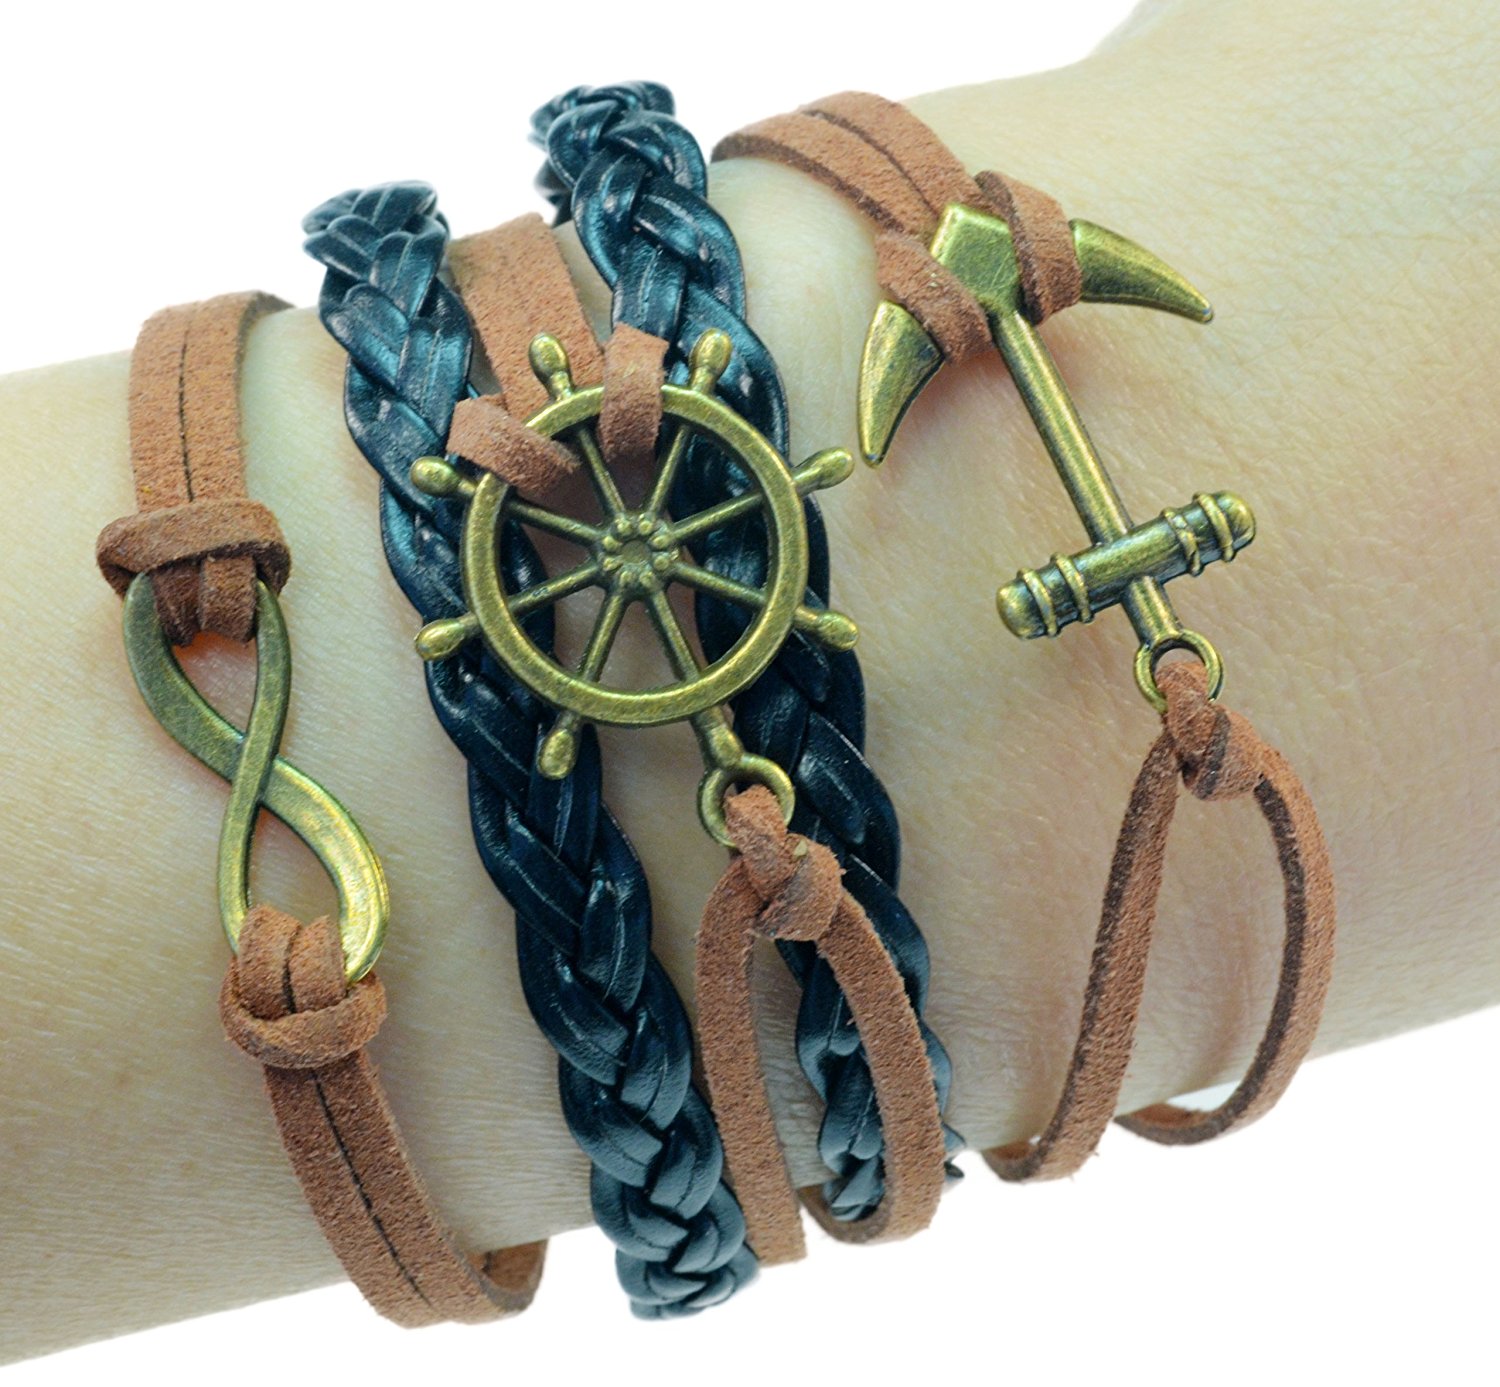 Fashion Jewelry vintage bronze ship wheel anchor infinity charms black brown braided leather rope bracelet